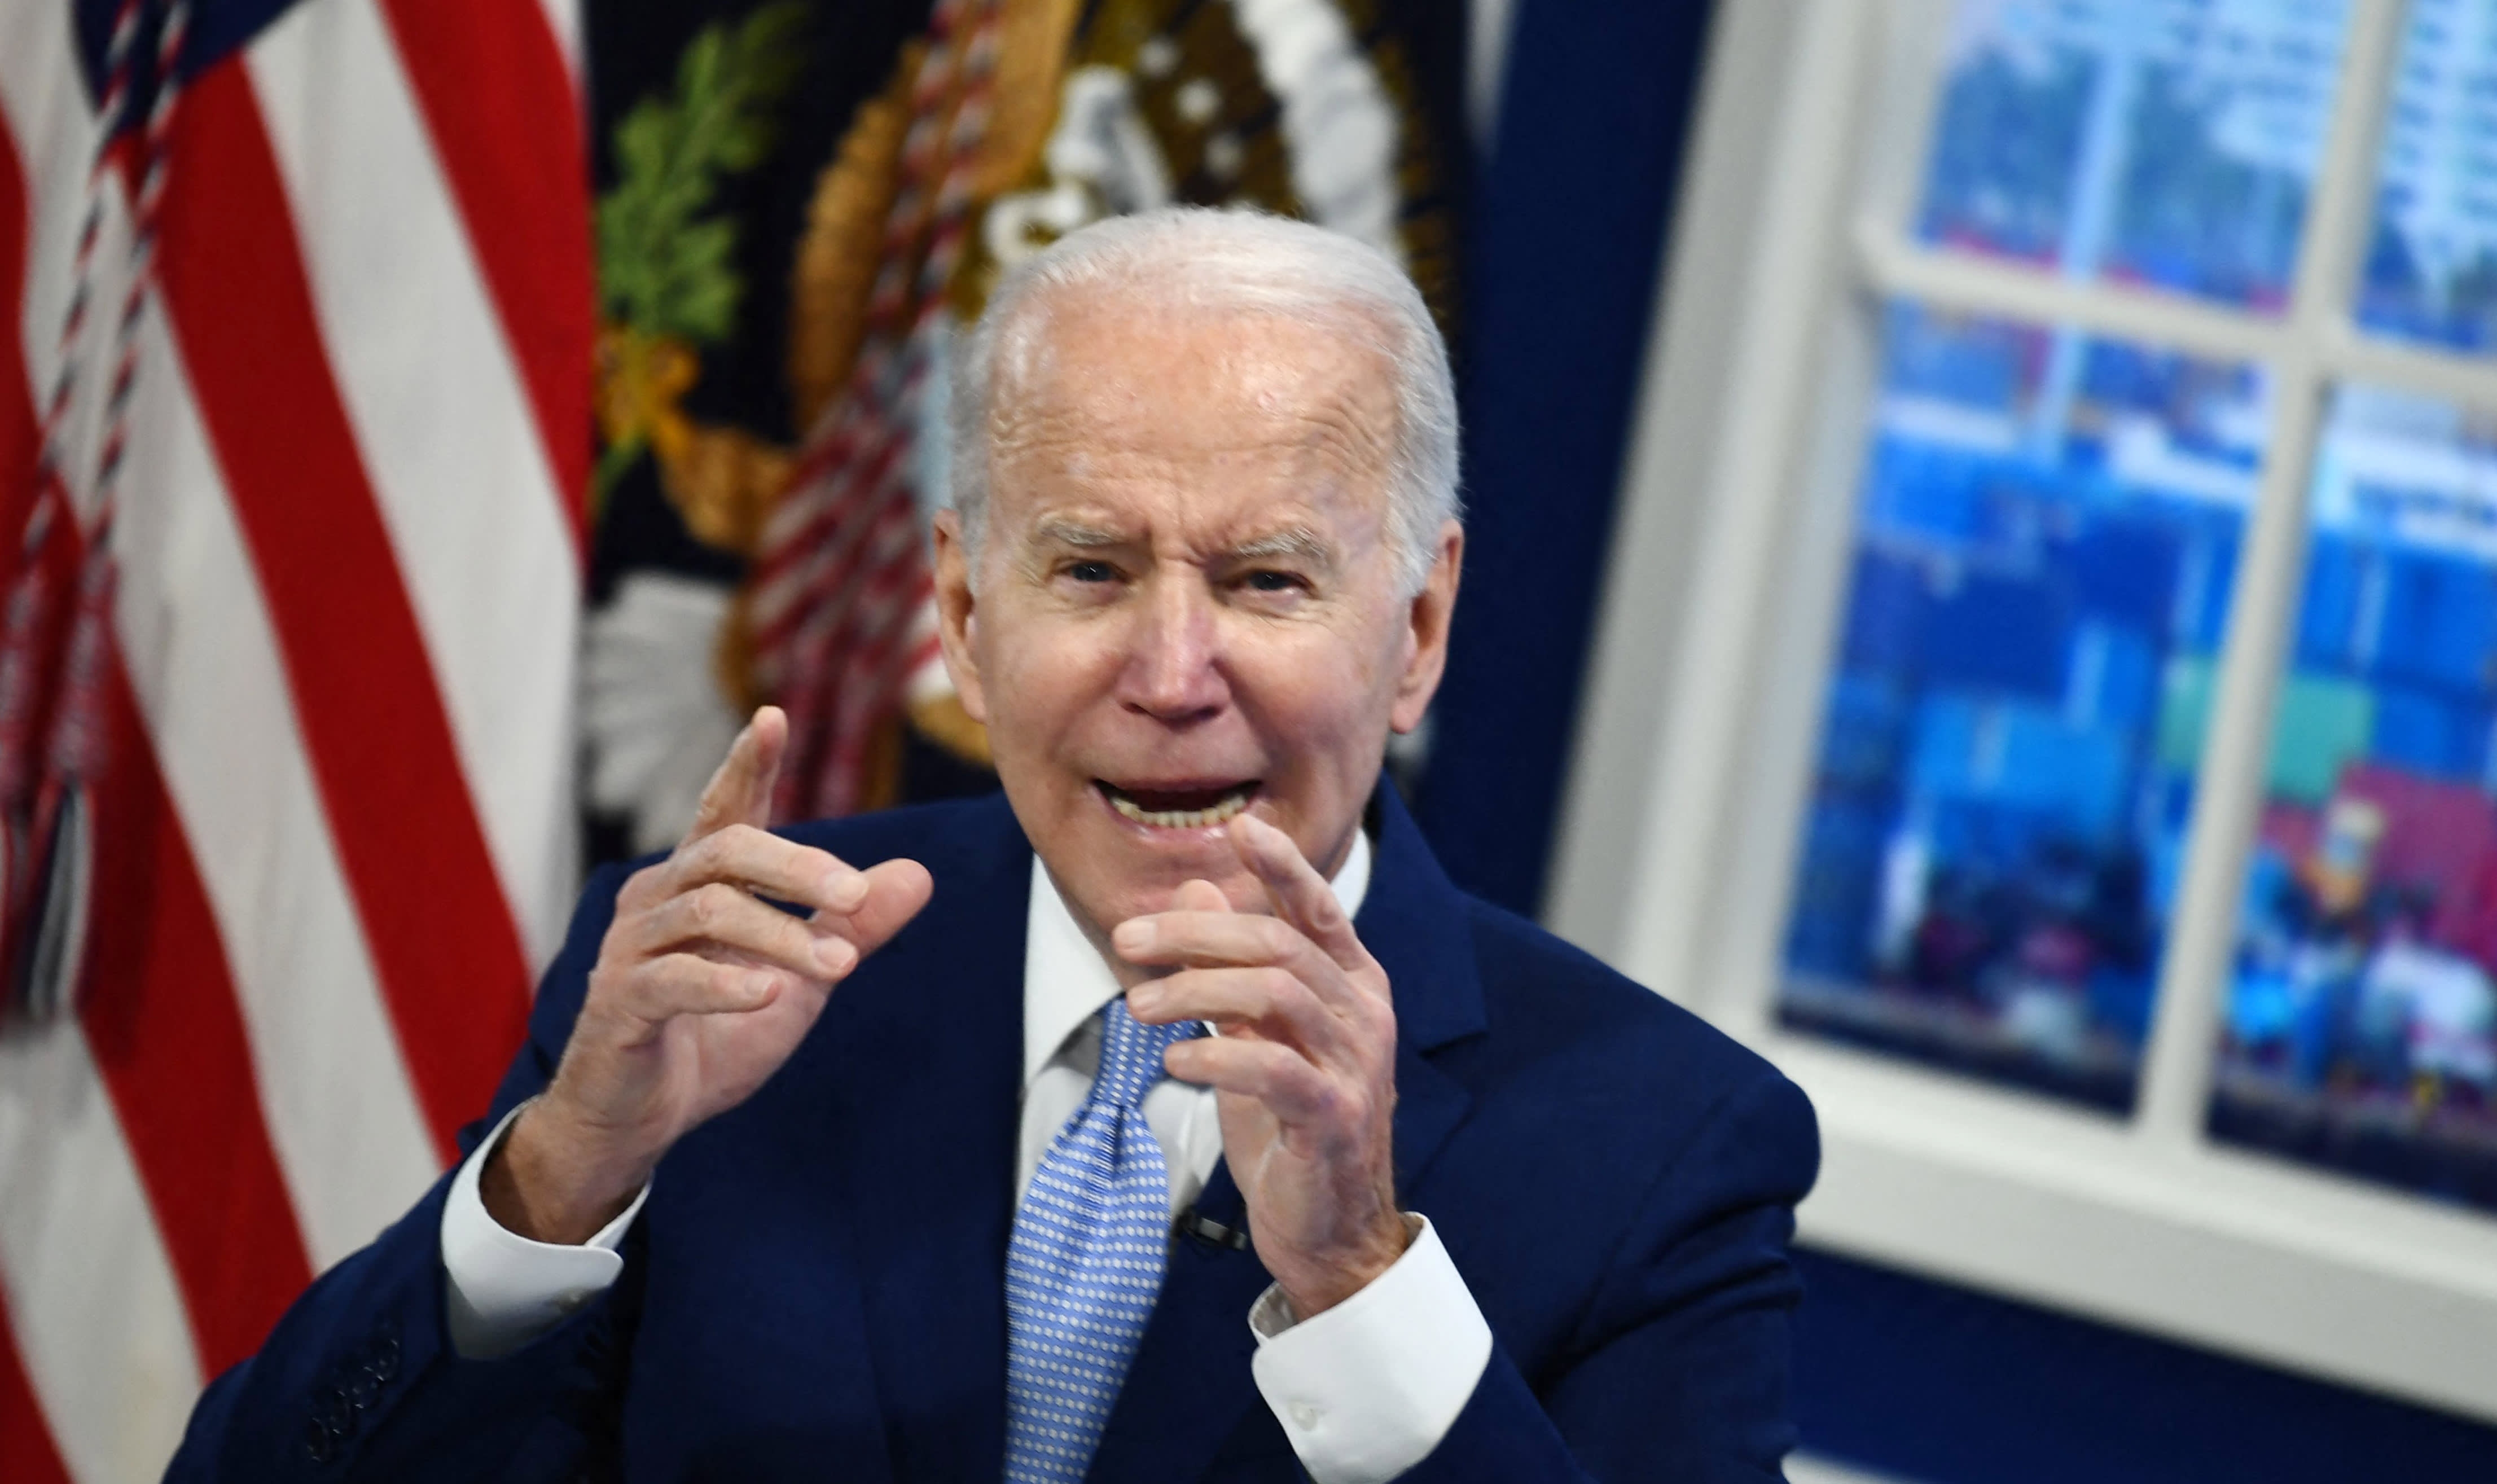 Biden says Covid surge needs to be solved at state level, vows full federal support